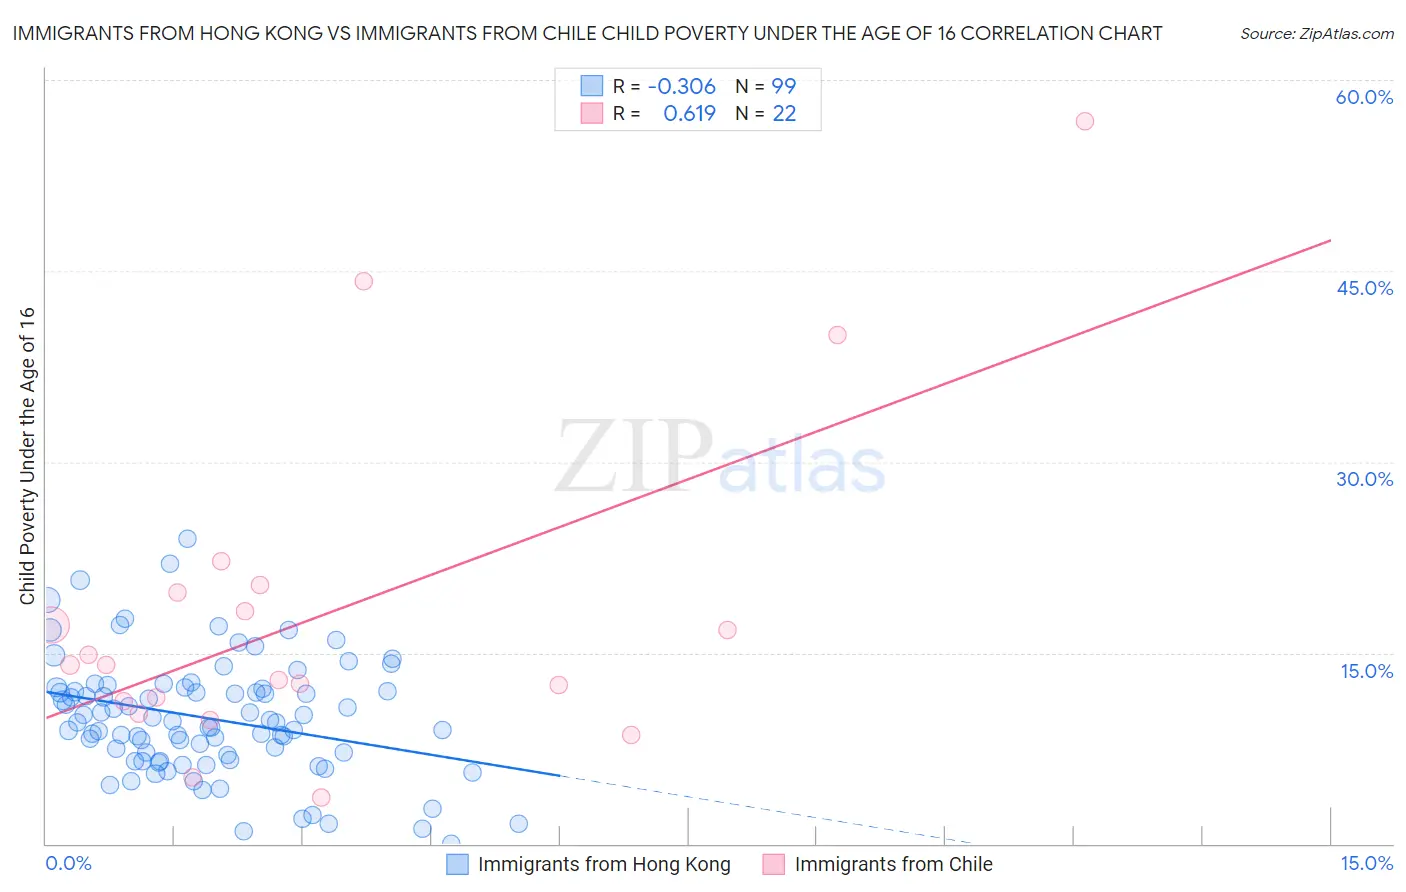 Immigrants from Hong Kong vs Immigrants from Chile Child Poverty Under the Age of 16